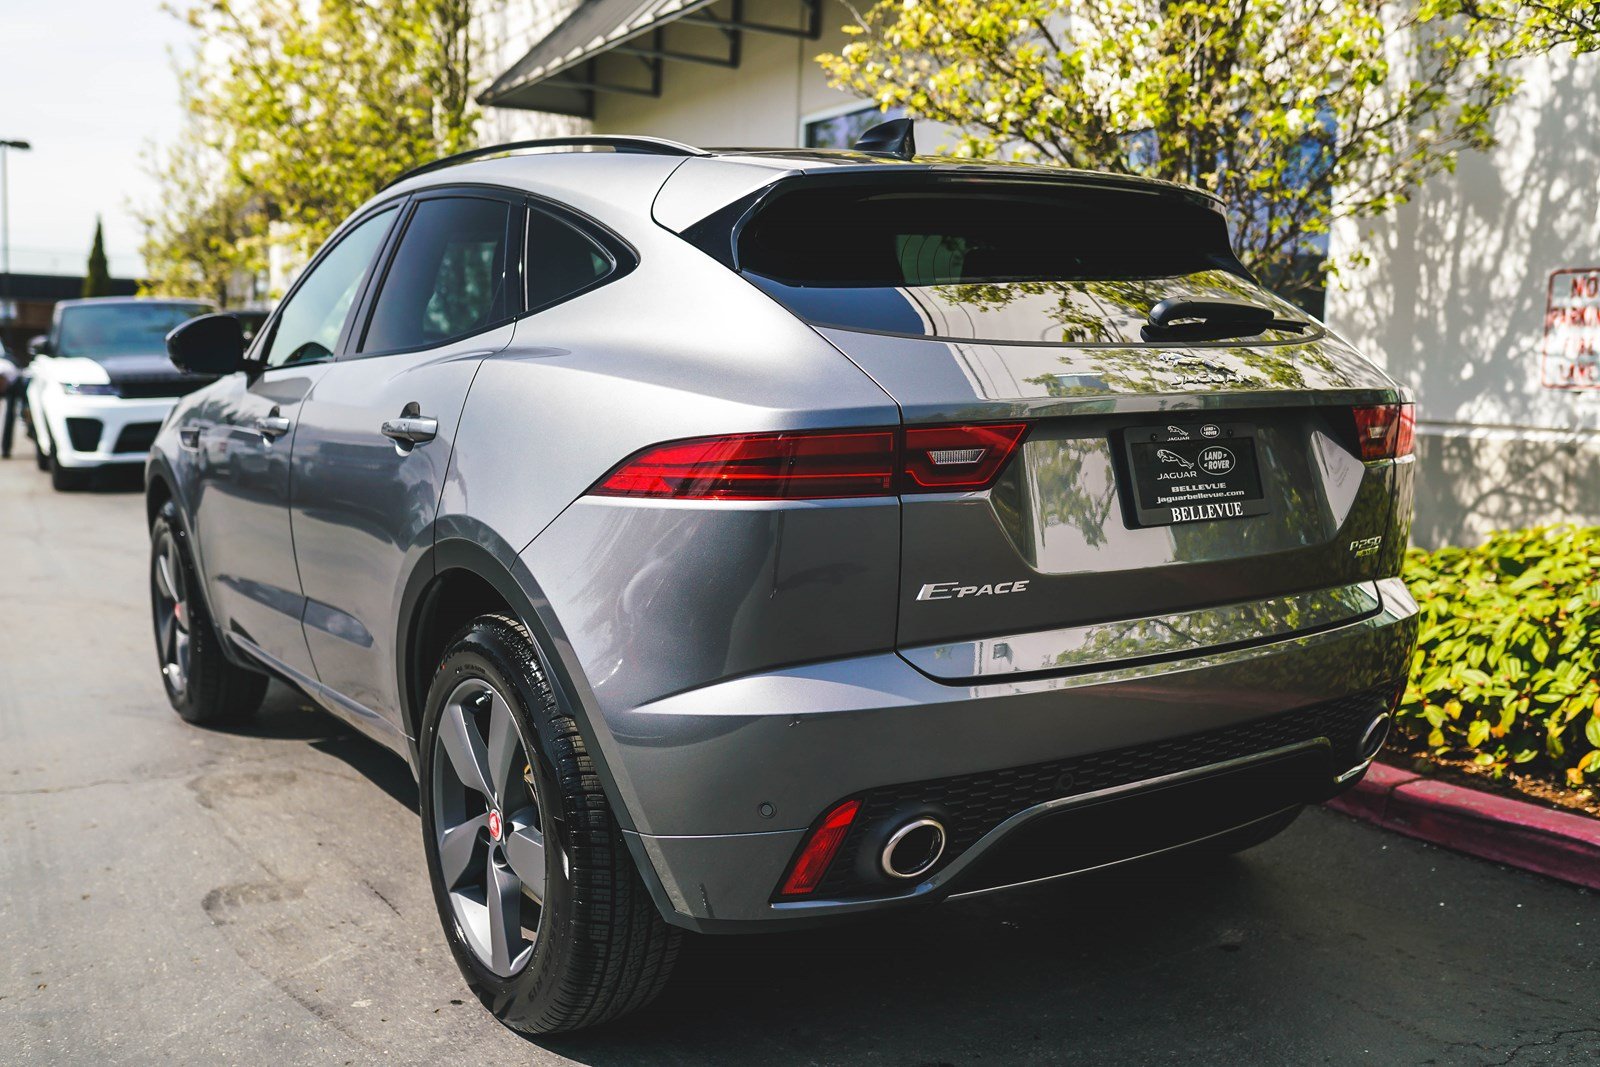 Pre-Owned 2020 Jaguar E-PACE Checkered Flag Edition Sport ...